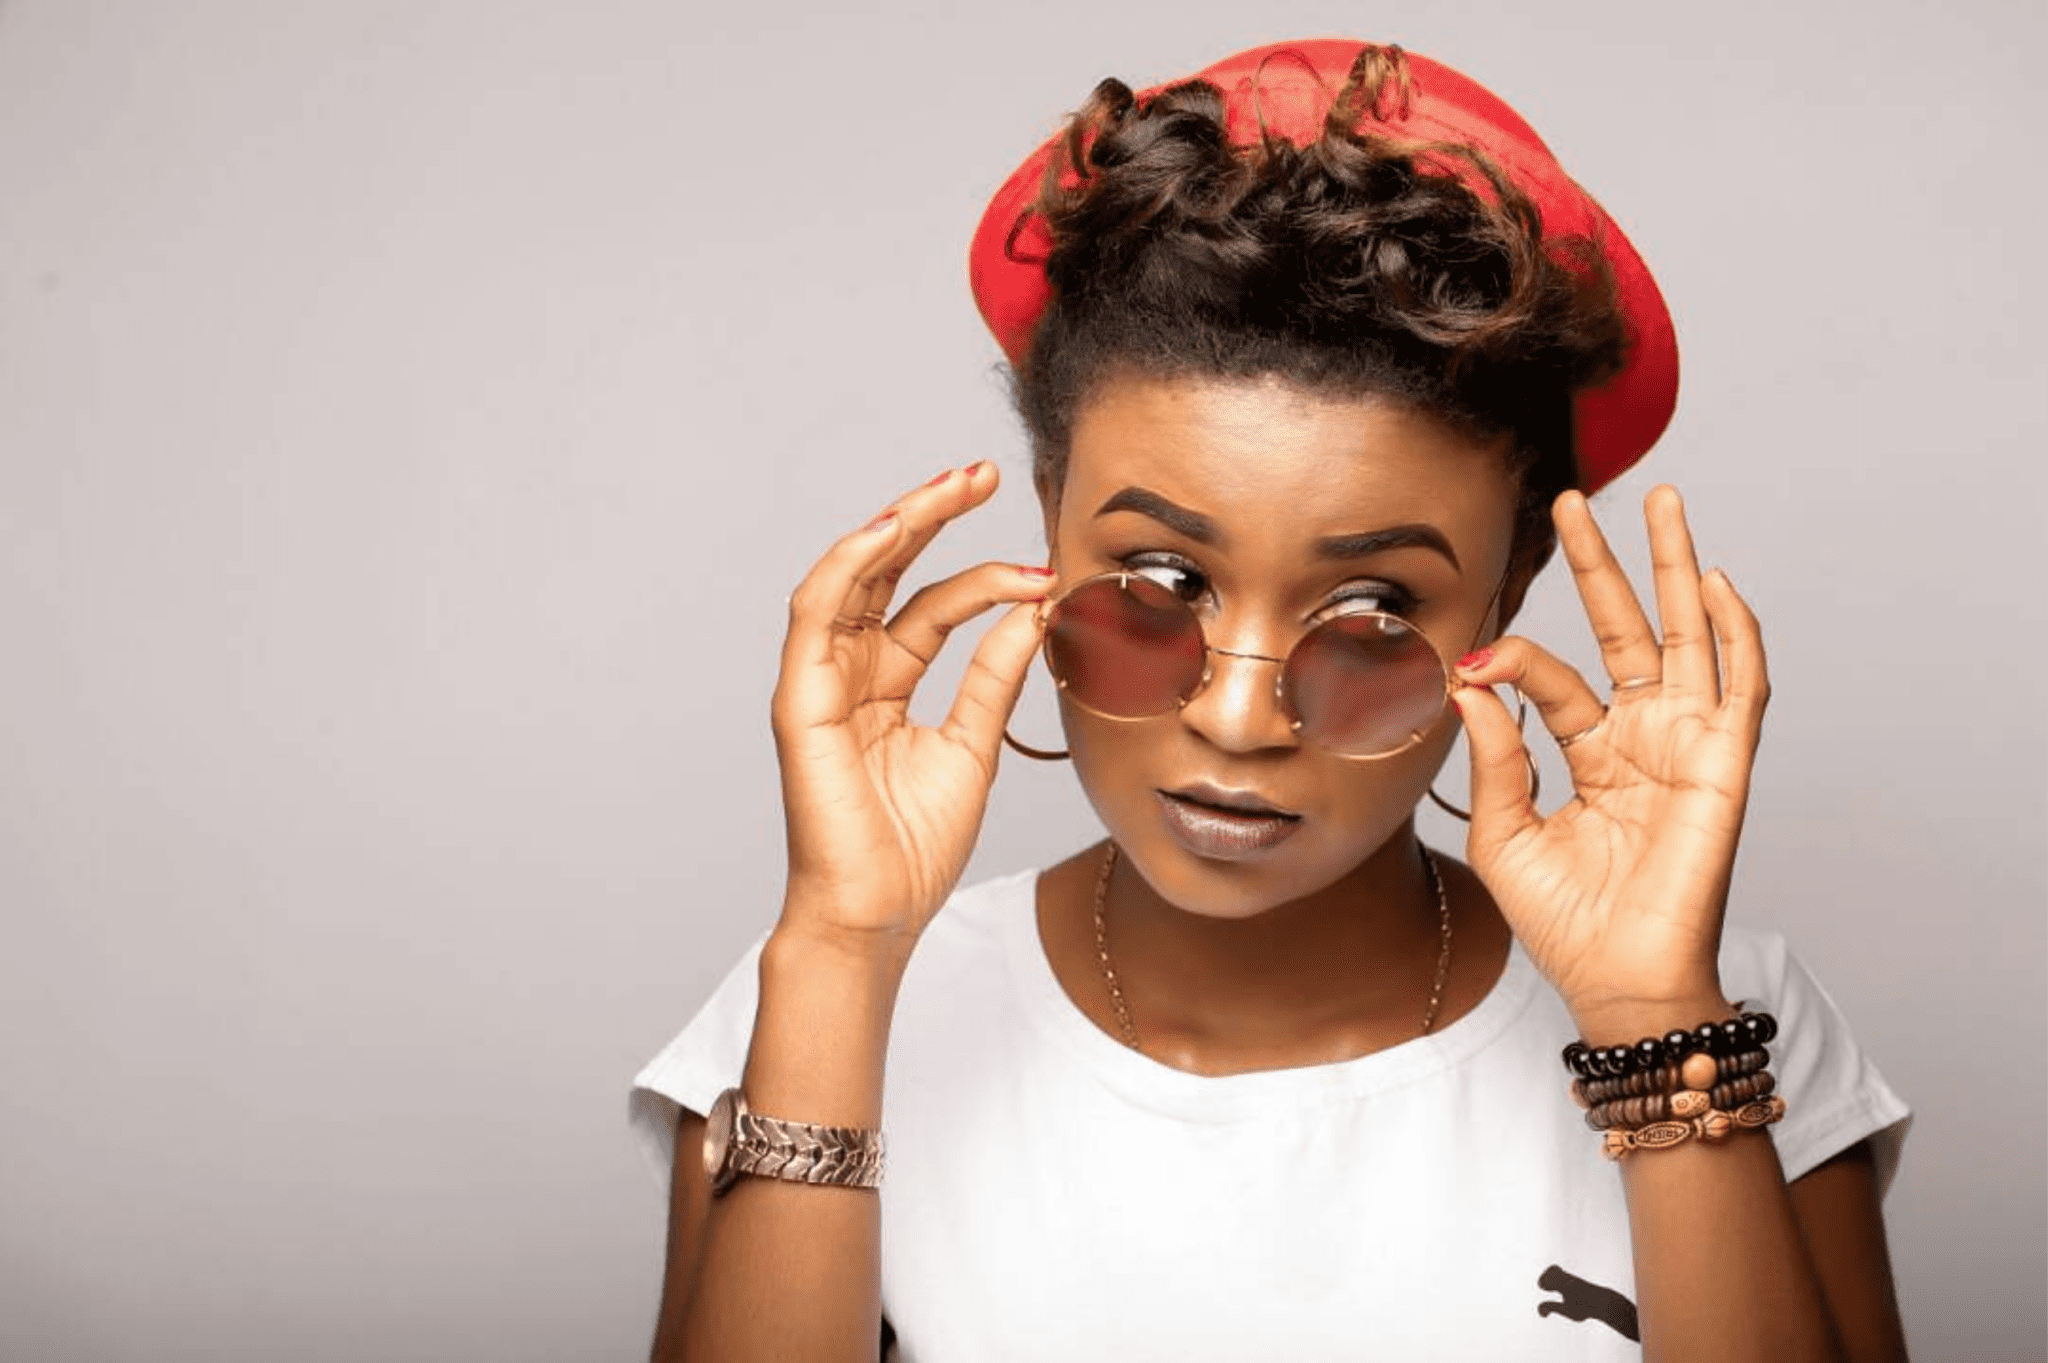 Dunnie’s “Wahala” displays her ability to inspire an experience with her music